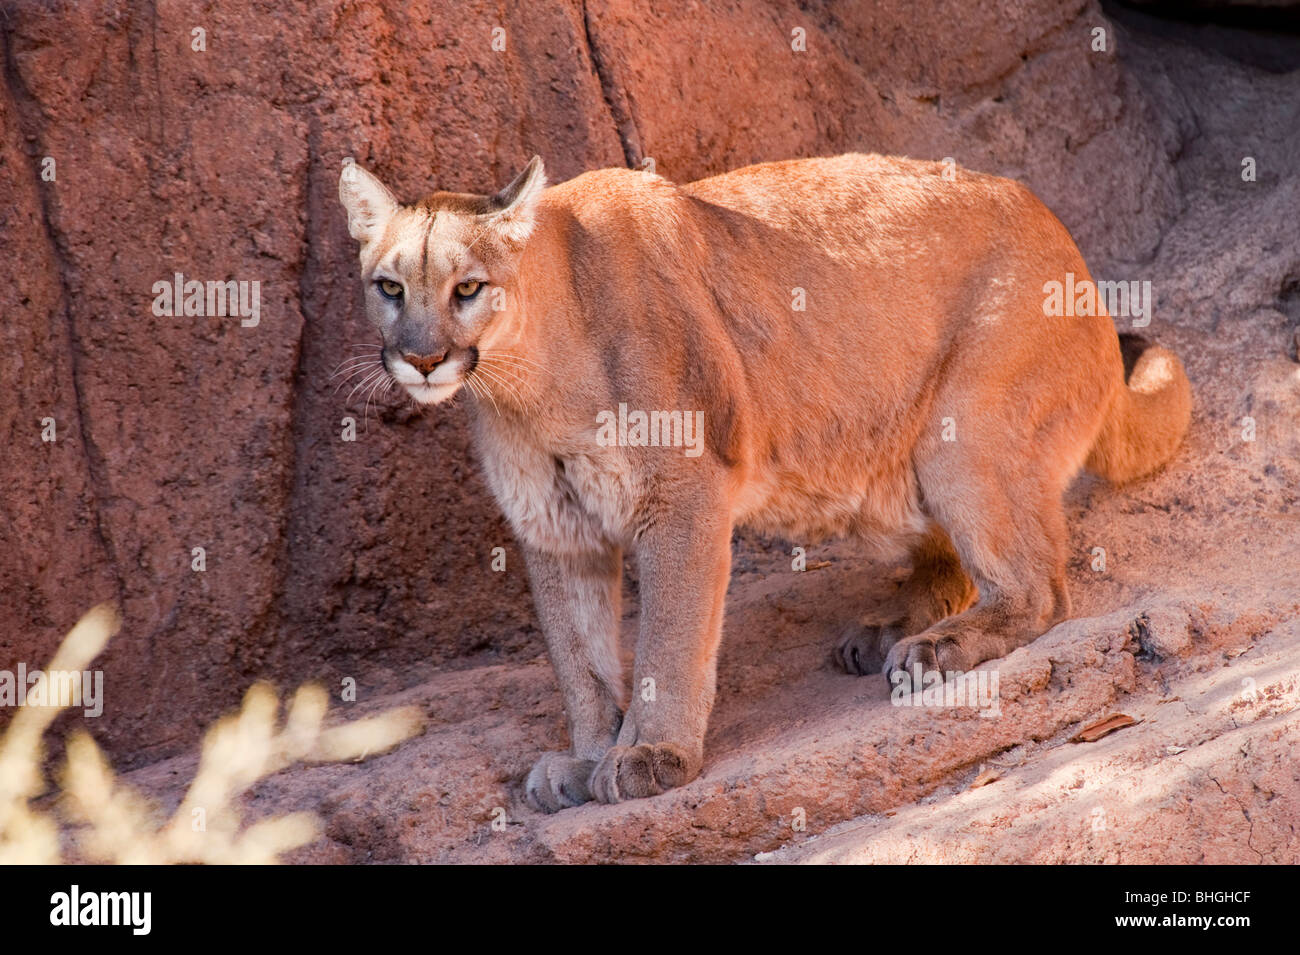 Tucson, Arizona - A cougar (puma concolor) moves about in it enclosure at  the Arizona Sonoran Desert Museum Stock Photo - Alamy